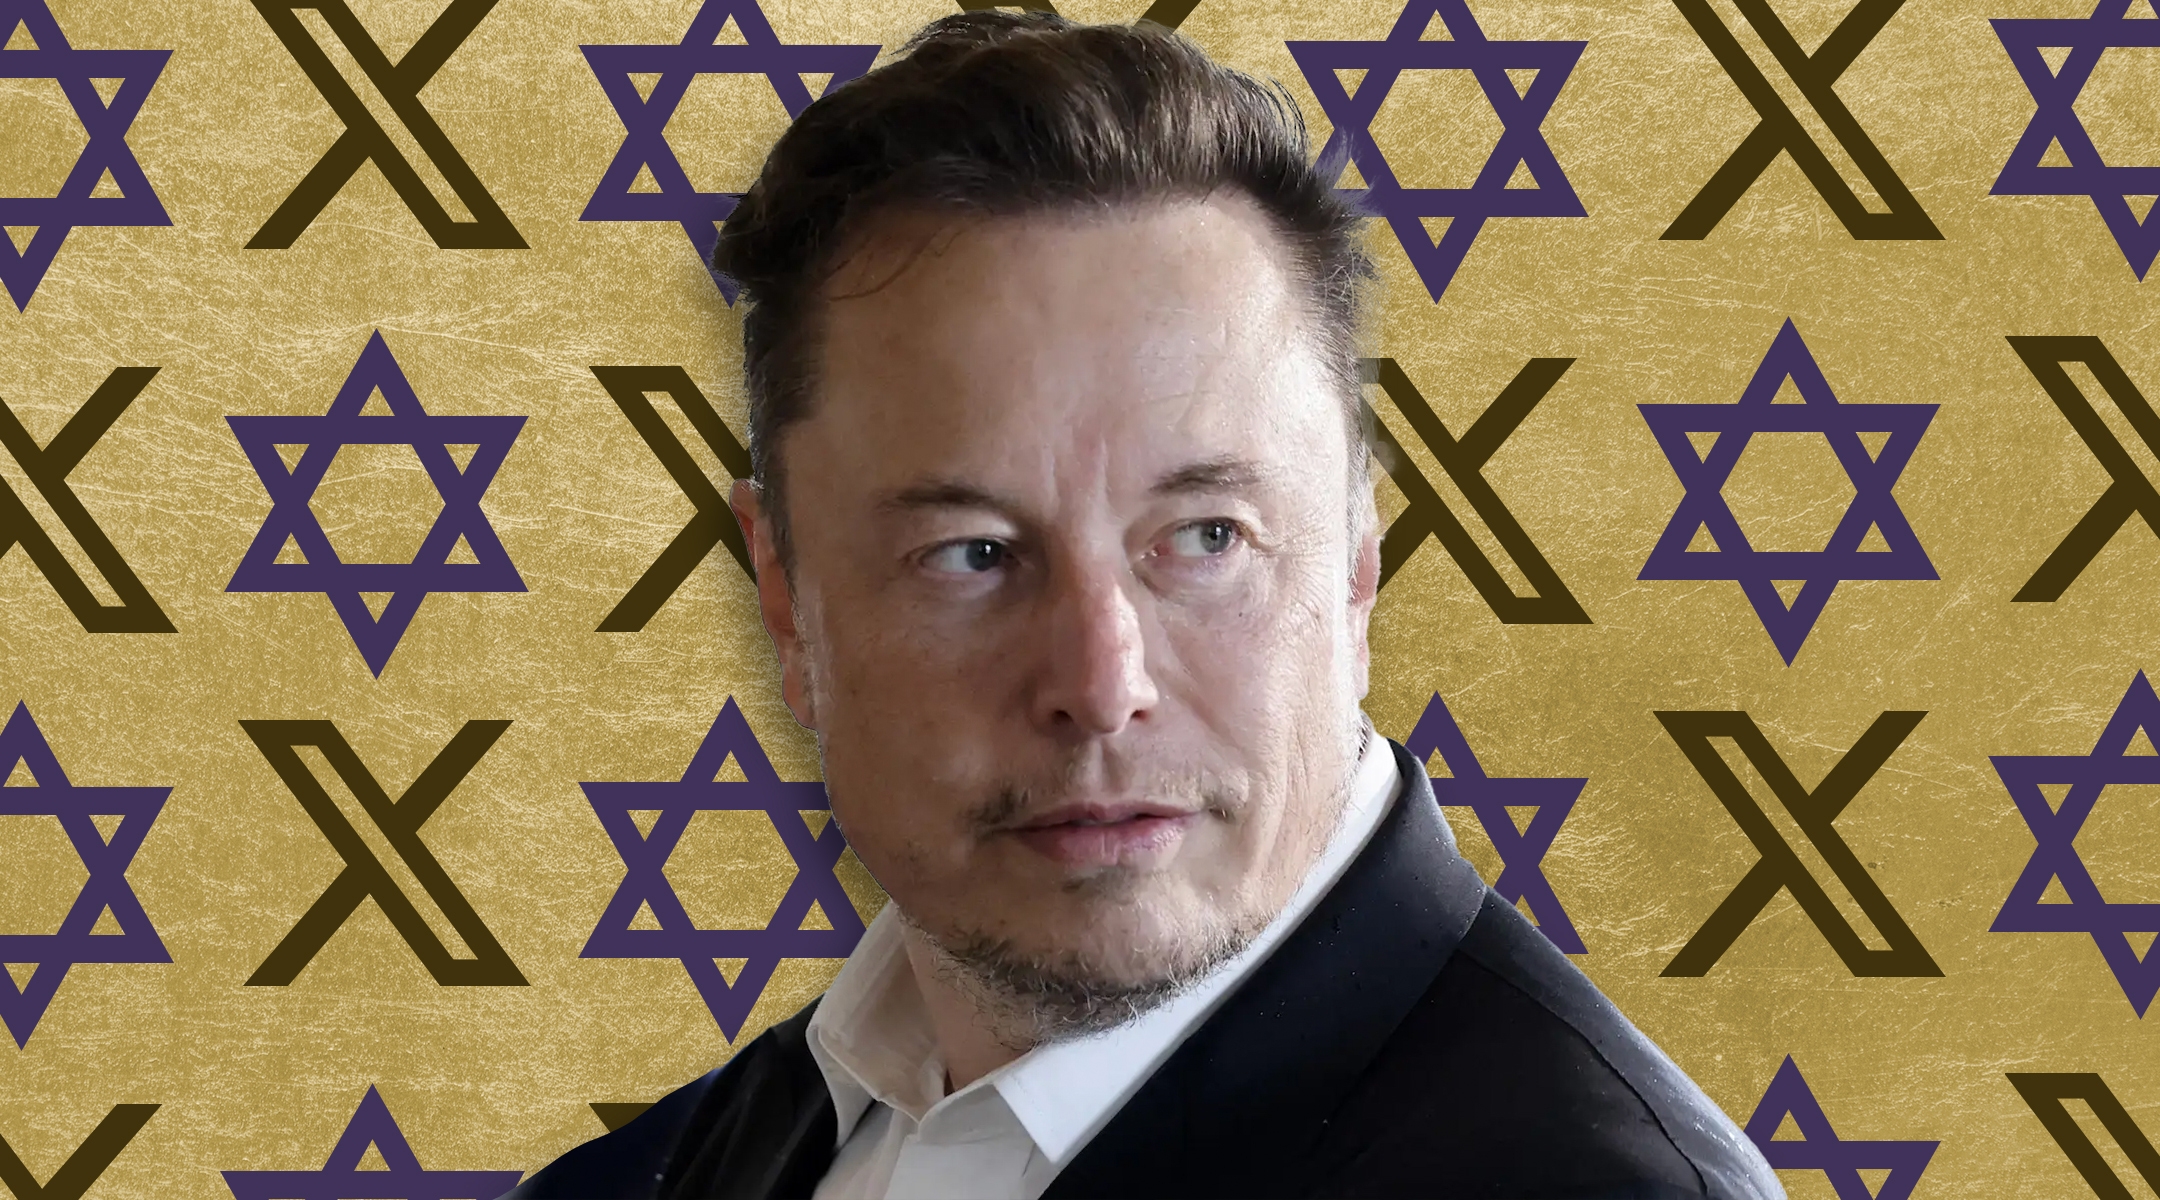 Elon Musk surrounded by "X" symbols and Stars of David